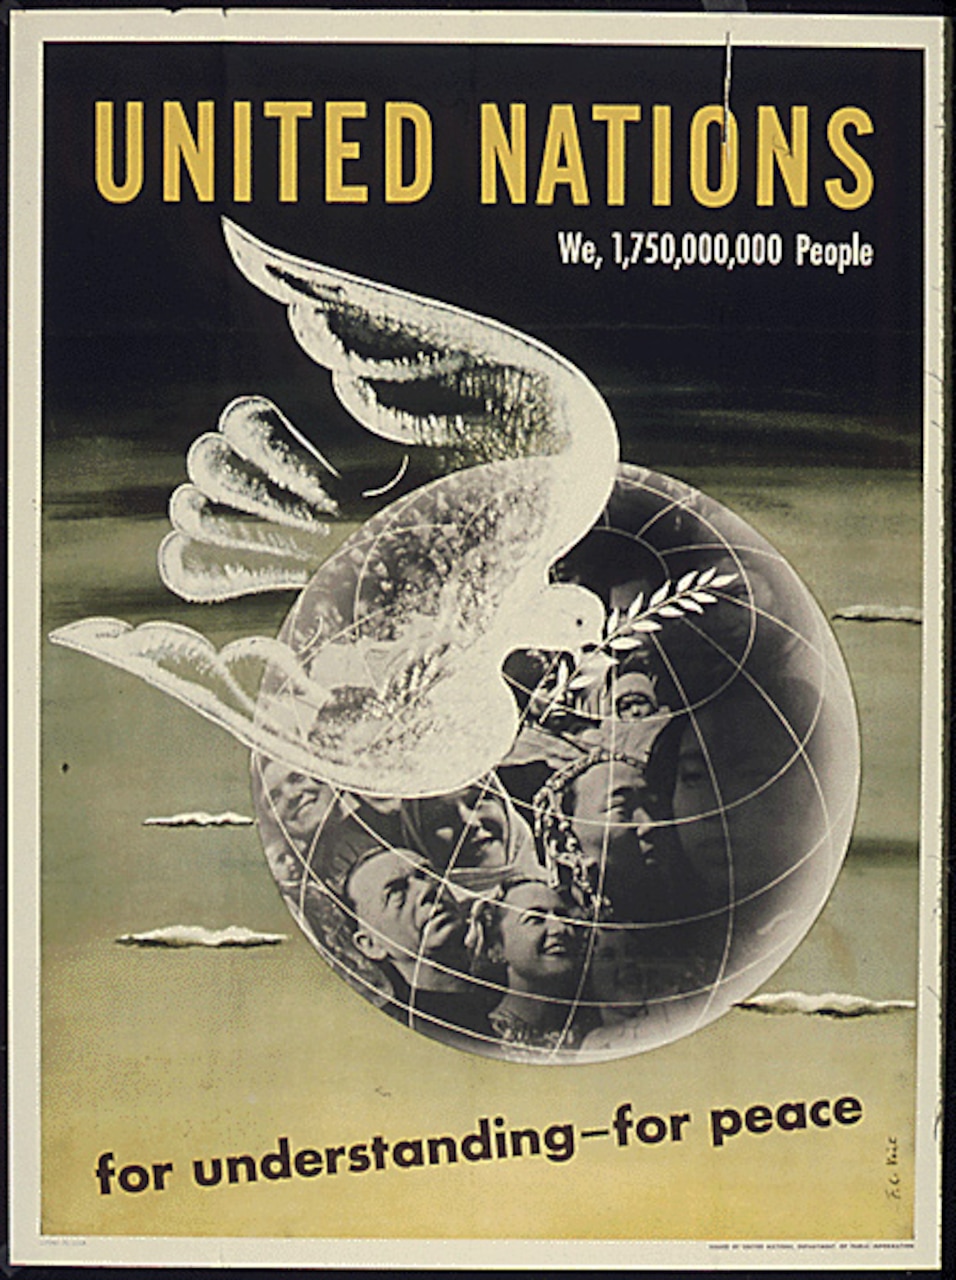 United Nations poster c. 1942–1945. (Courtesy National Archives)